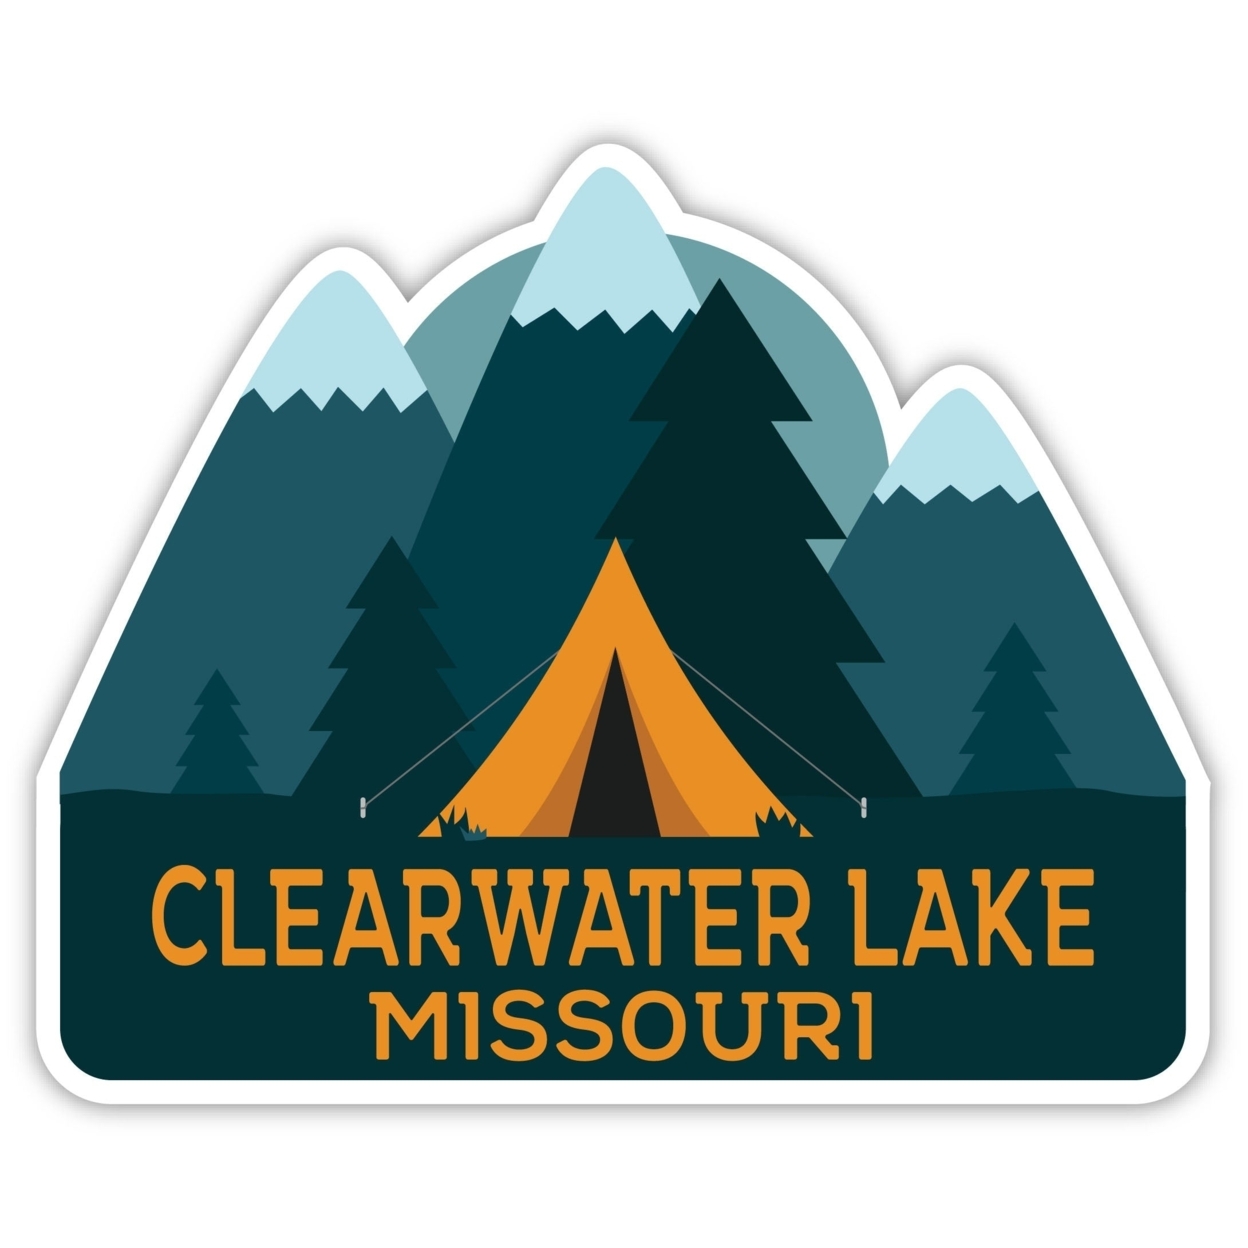 Clearwater Lake Missouri Souvenir Decorative Stickers (Choose Theme And Size) - 4-Pack, 6-Inch, Tent